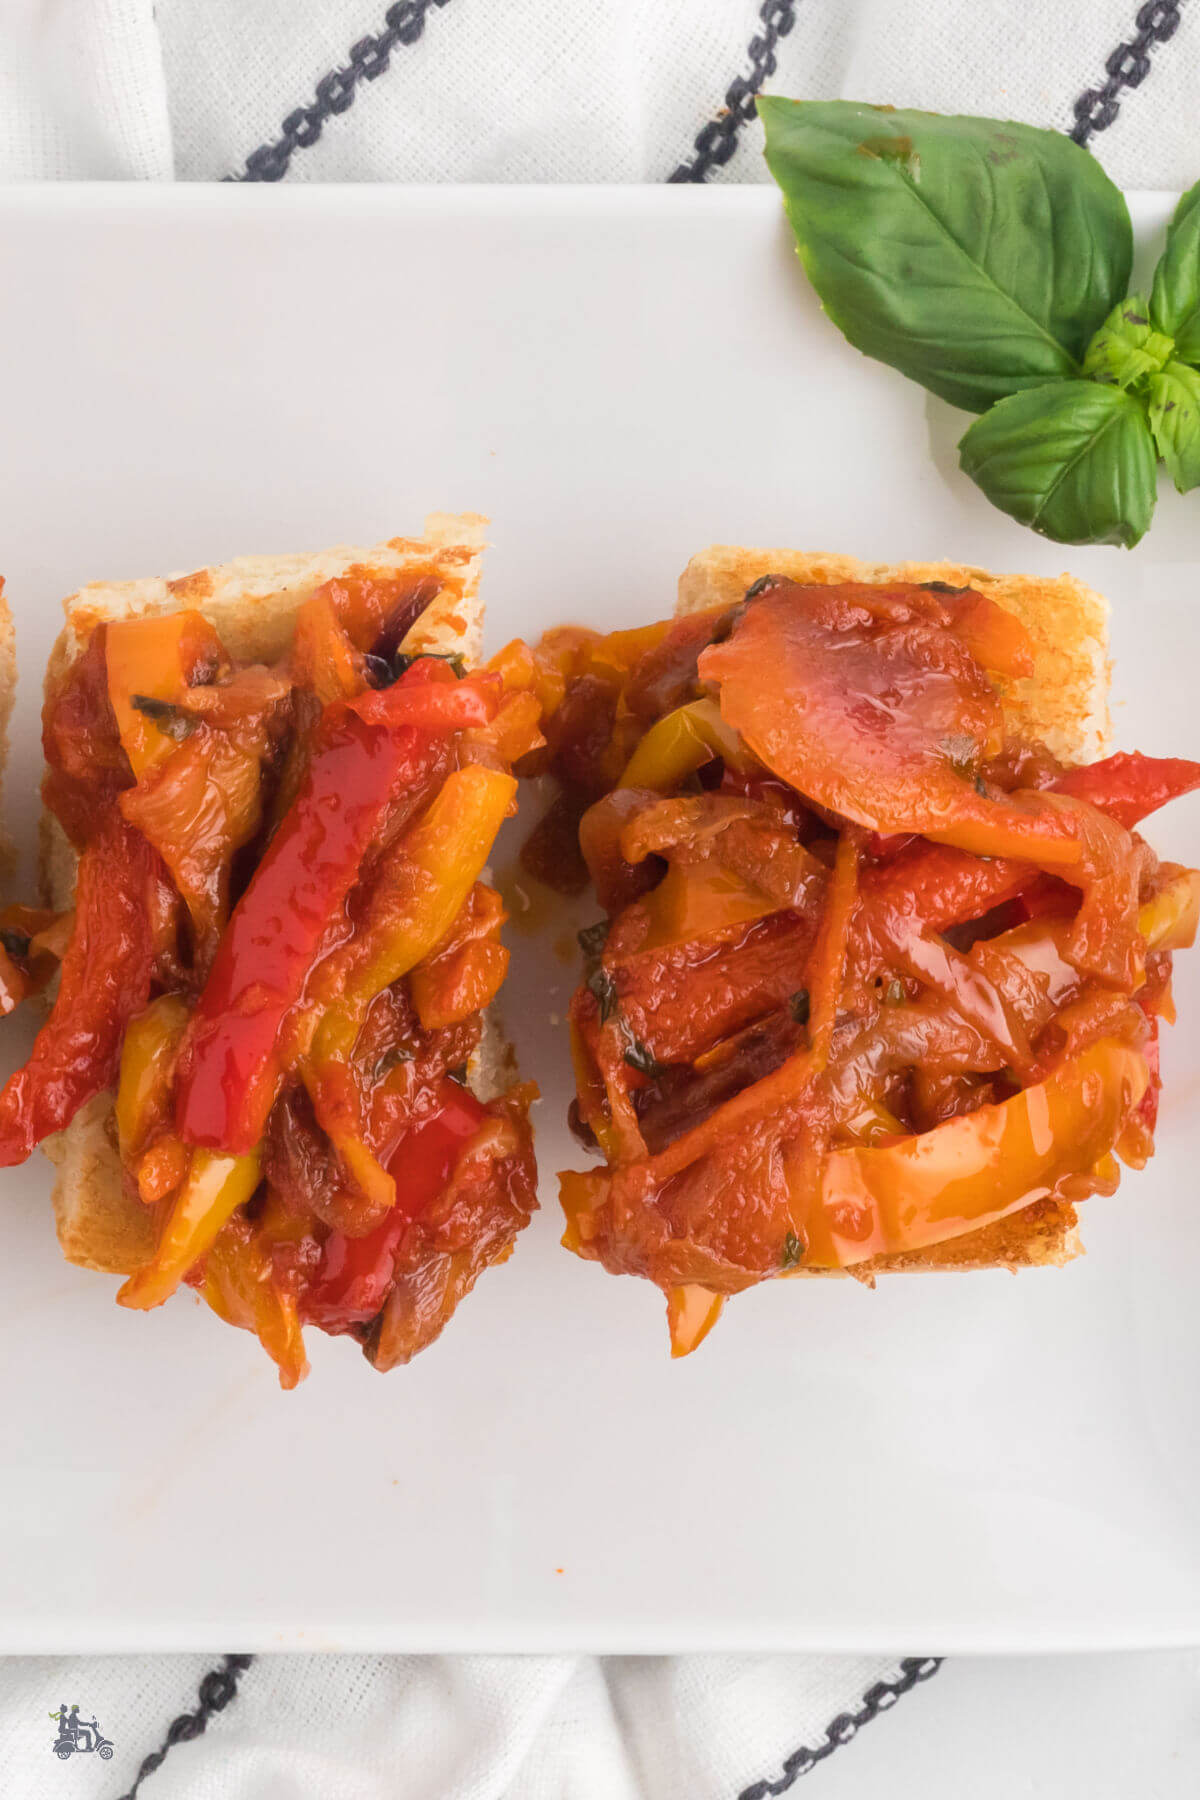 Sweet bell peppers stewed in olive oil and spread on toasted baguette slices for an antipasto. 